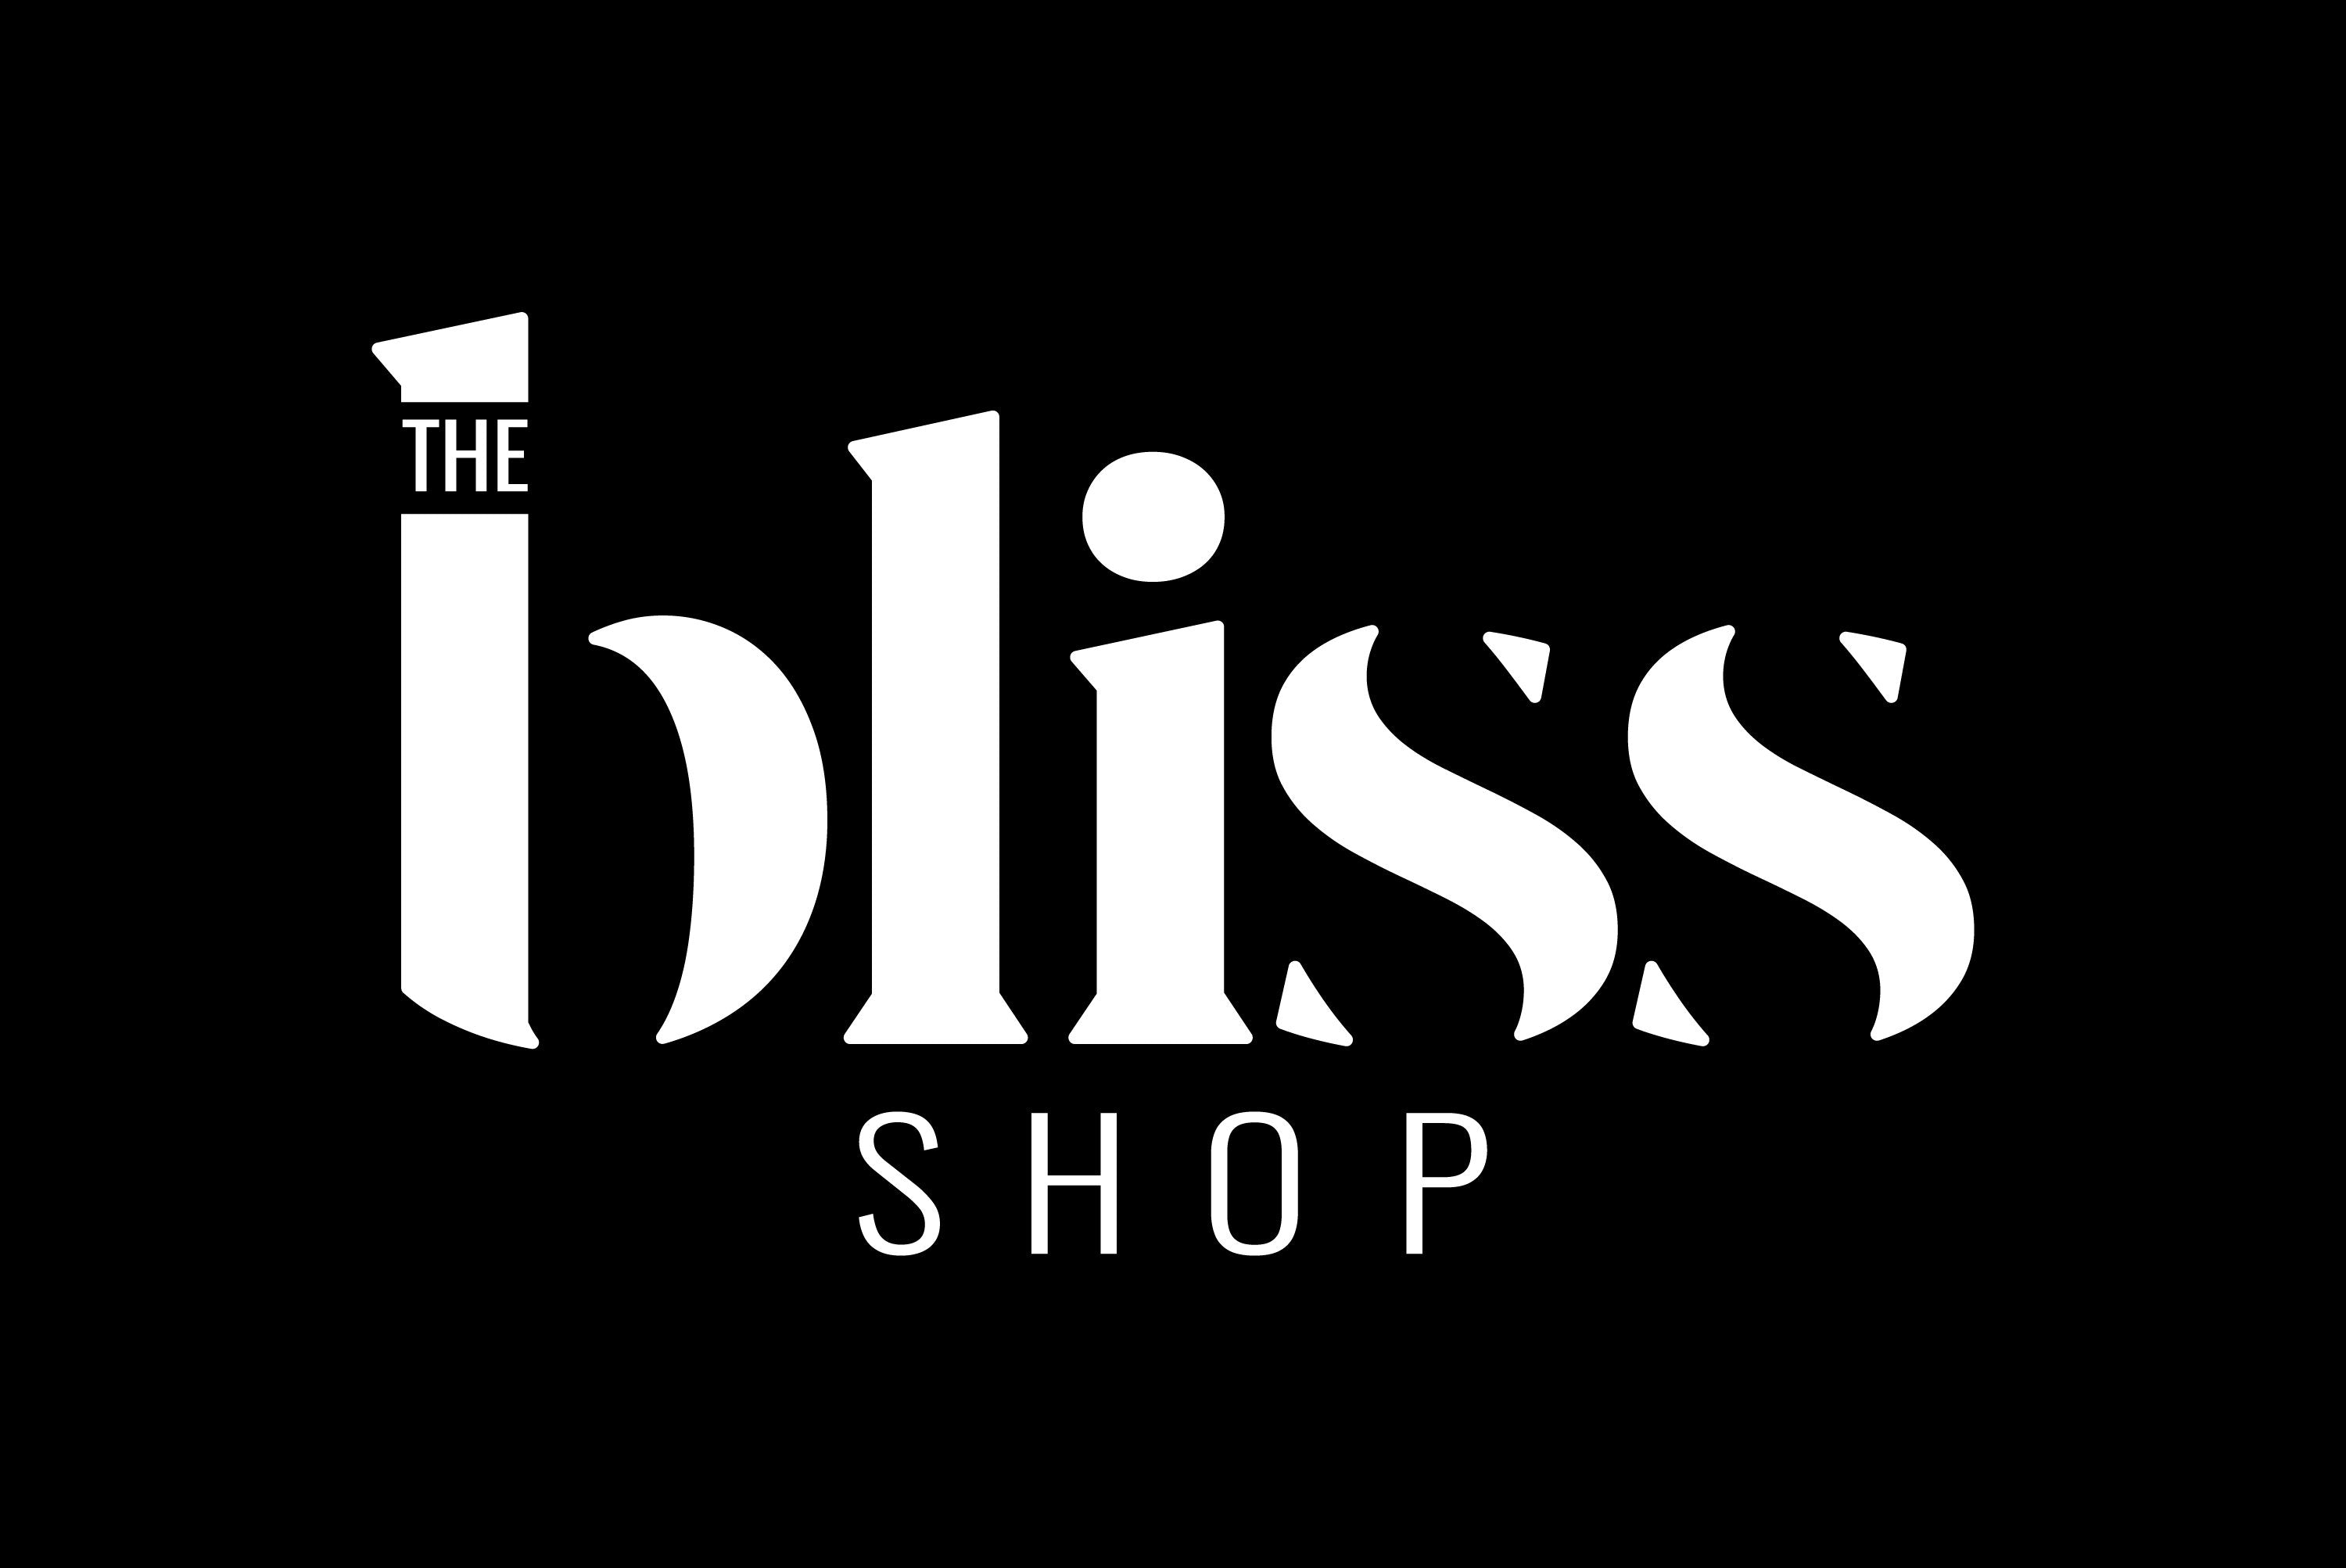 The Bliss Shop